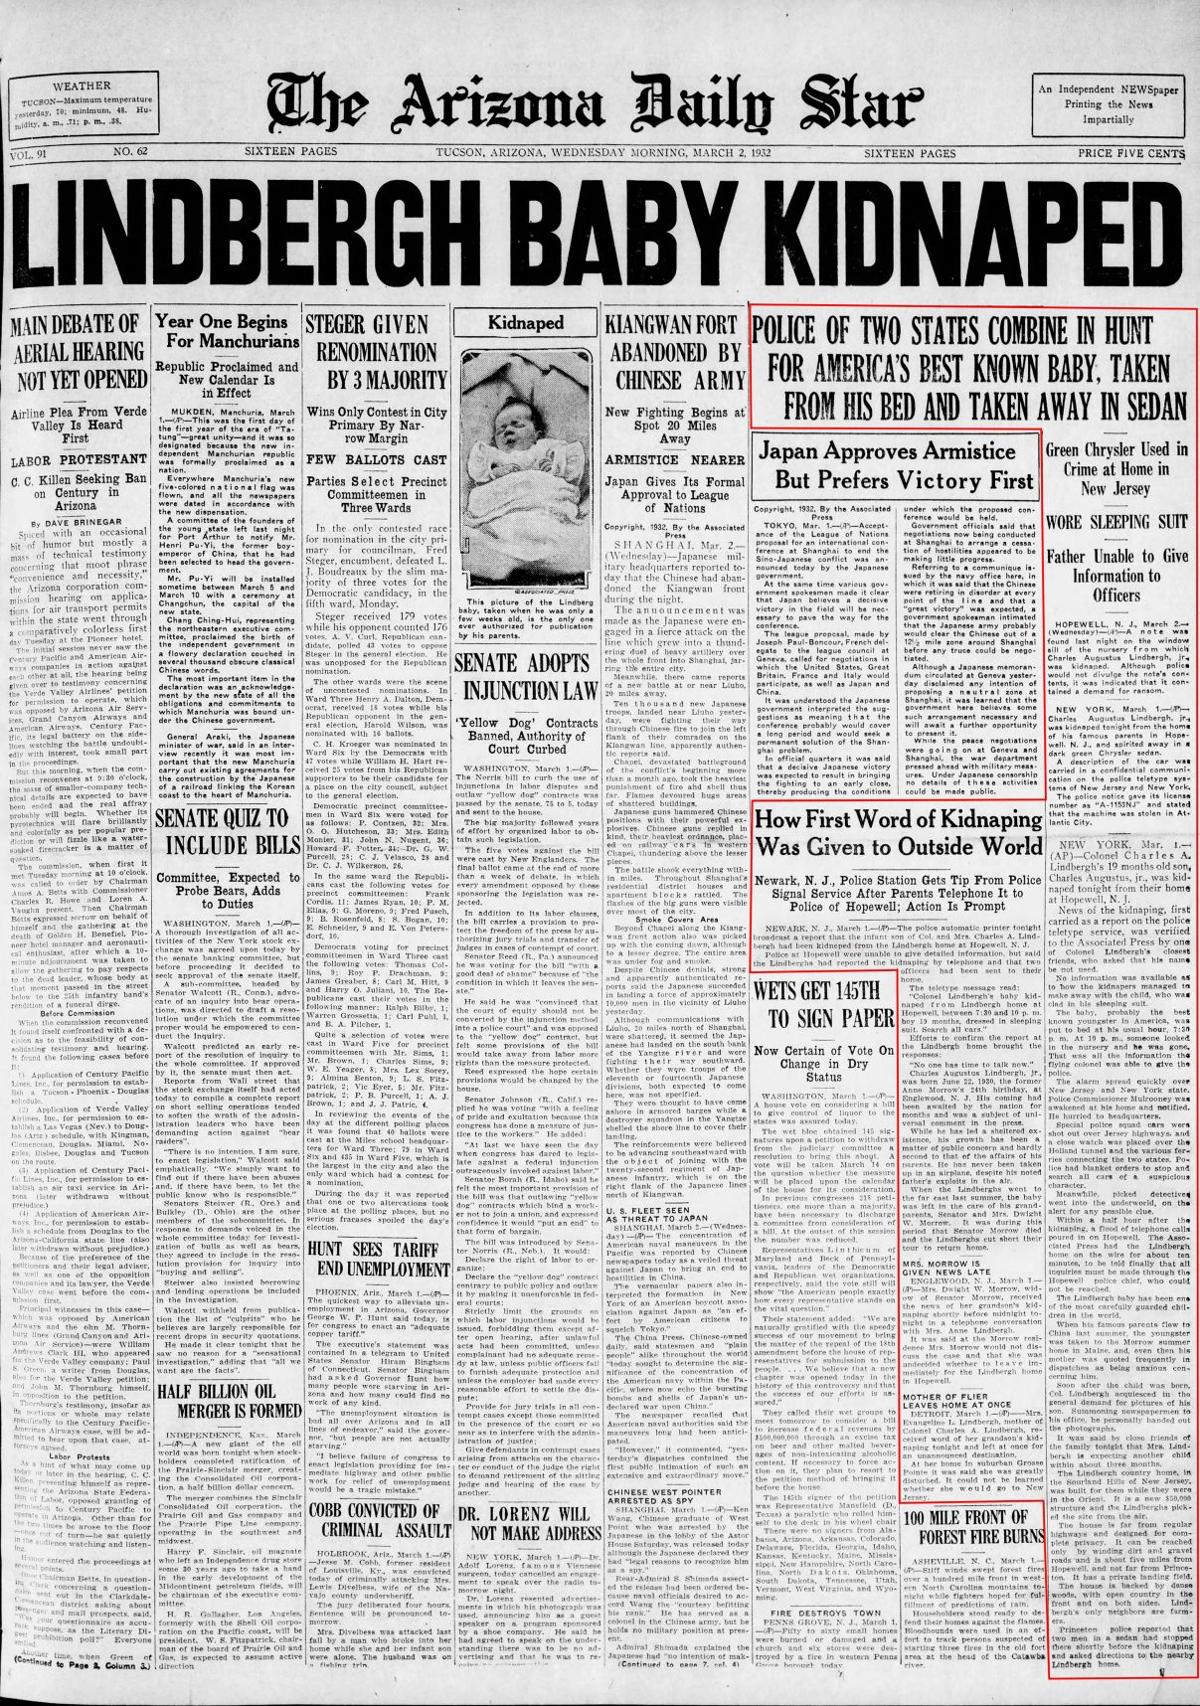 Wednesday, March 2, 1932, front page: Lindbergh baby kidnaped